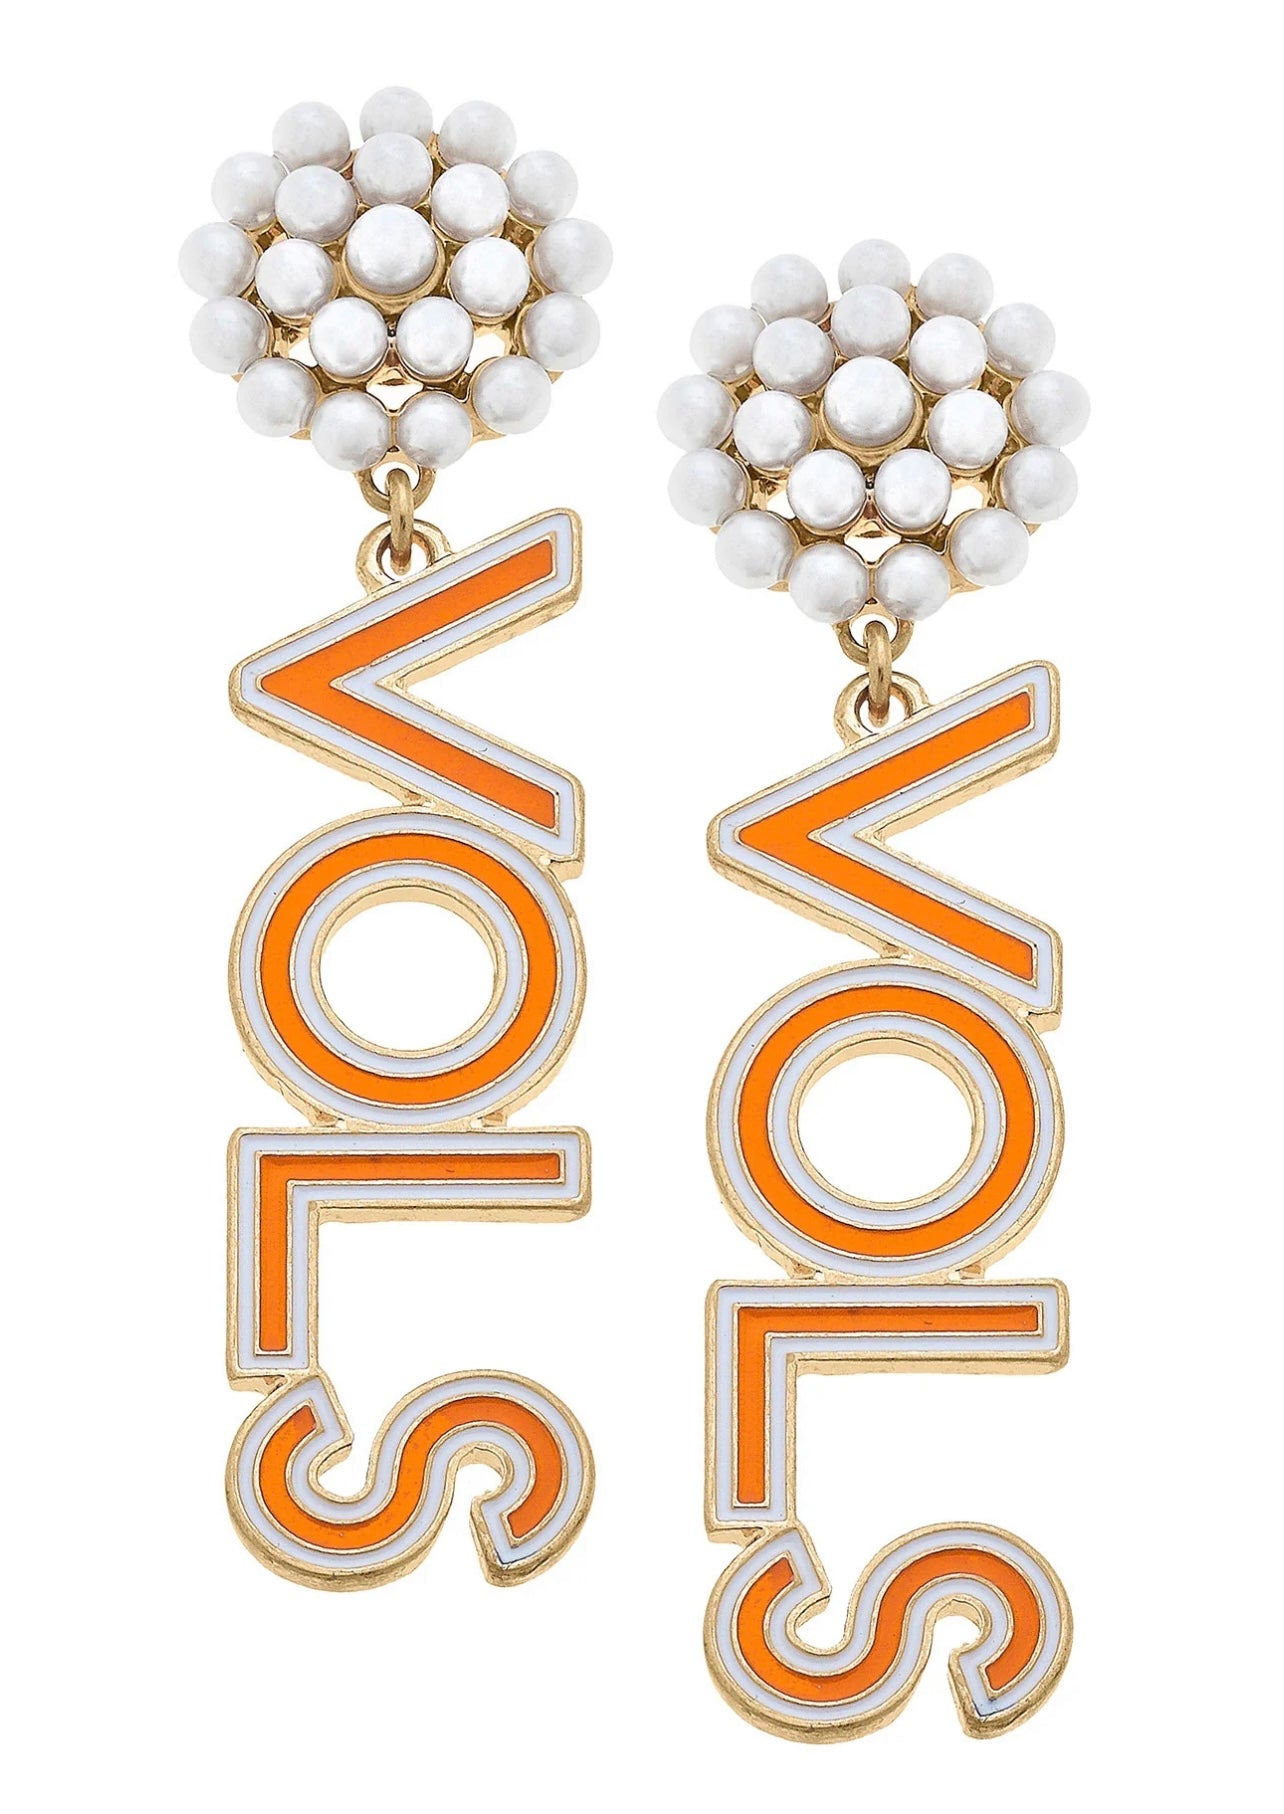 University of Tennesse college drop earrings with pearl cluster studs featuring "VOLS in orange and white.